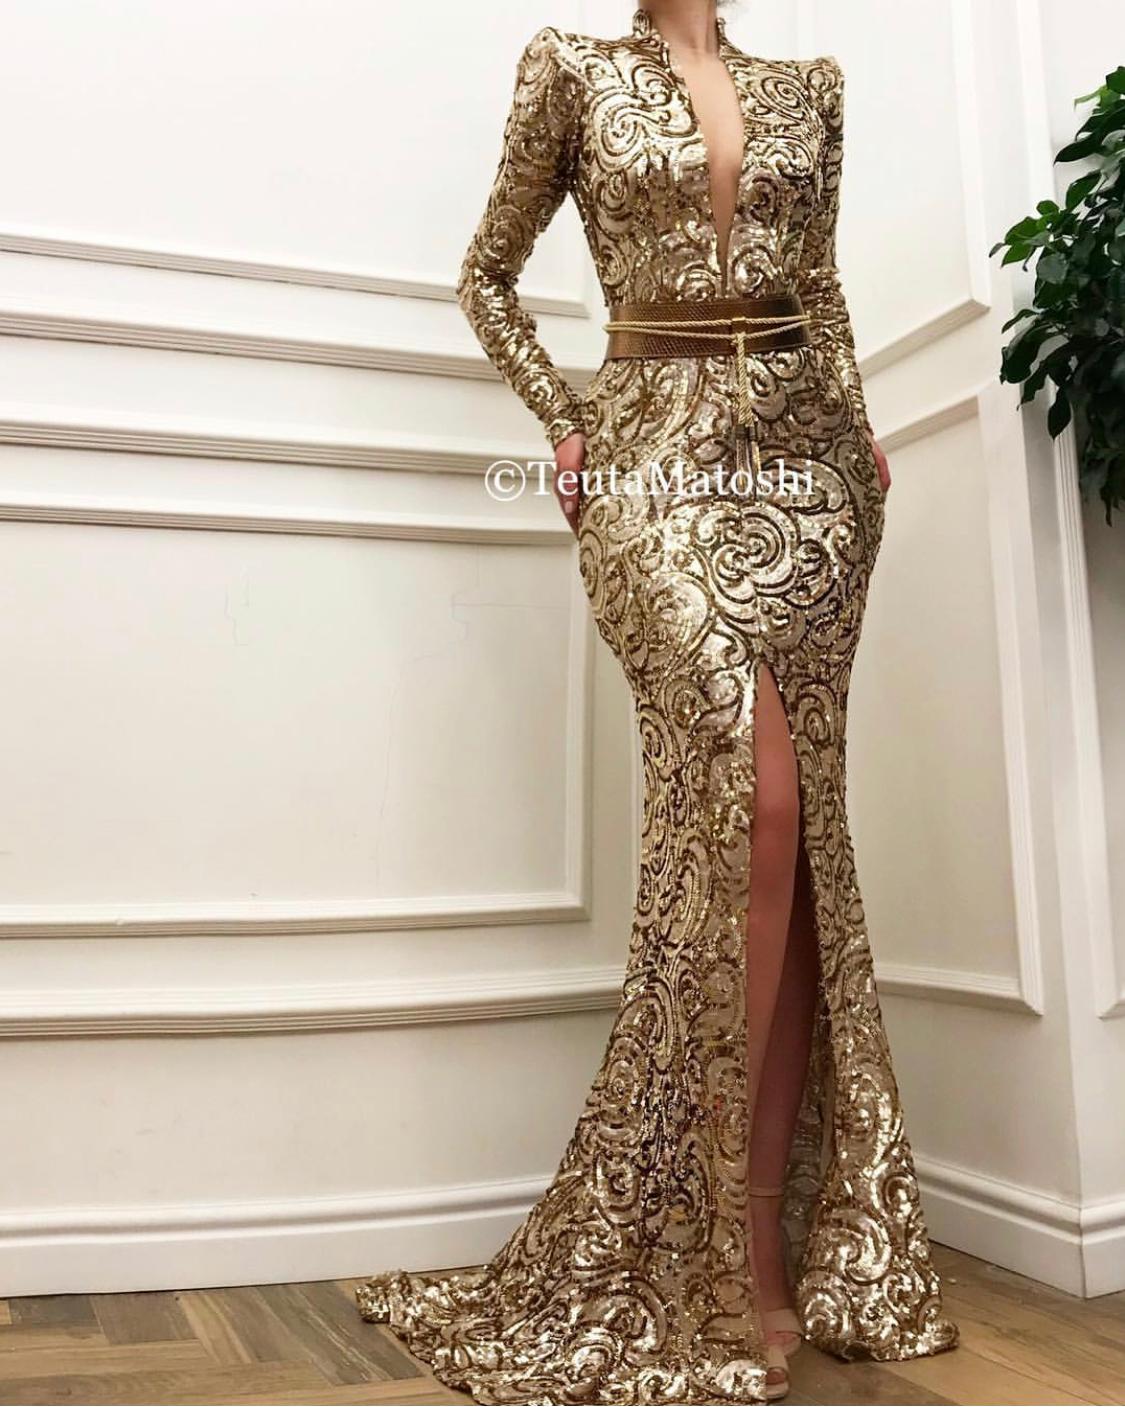 Gold mermaid dress with long sleeves